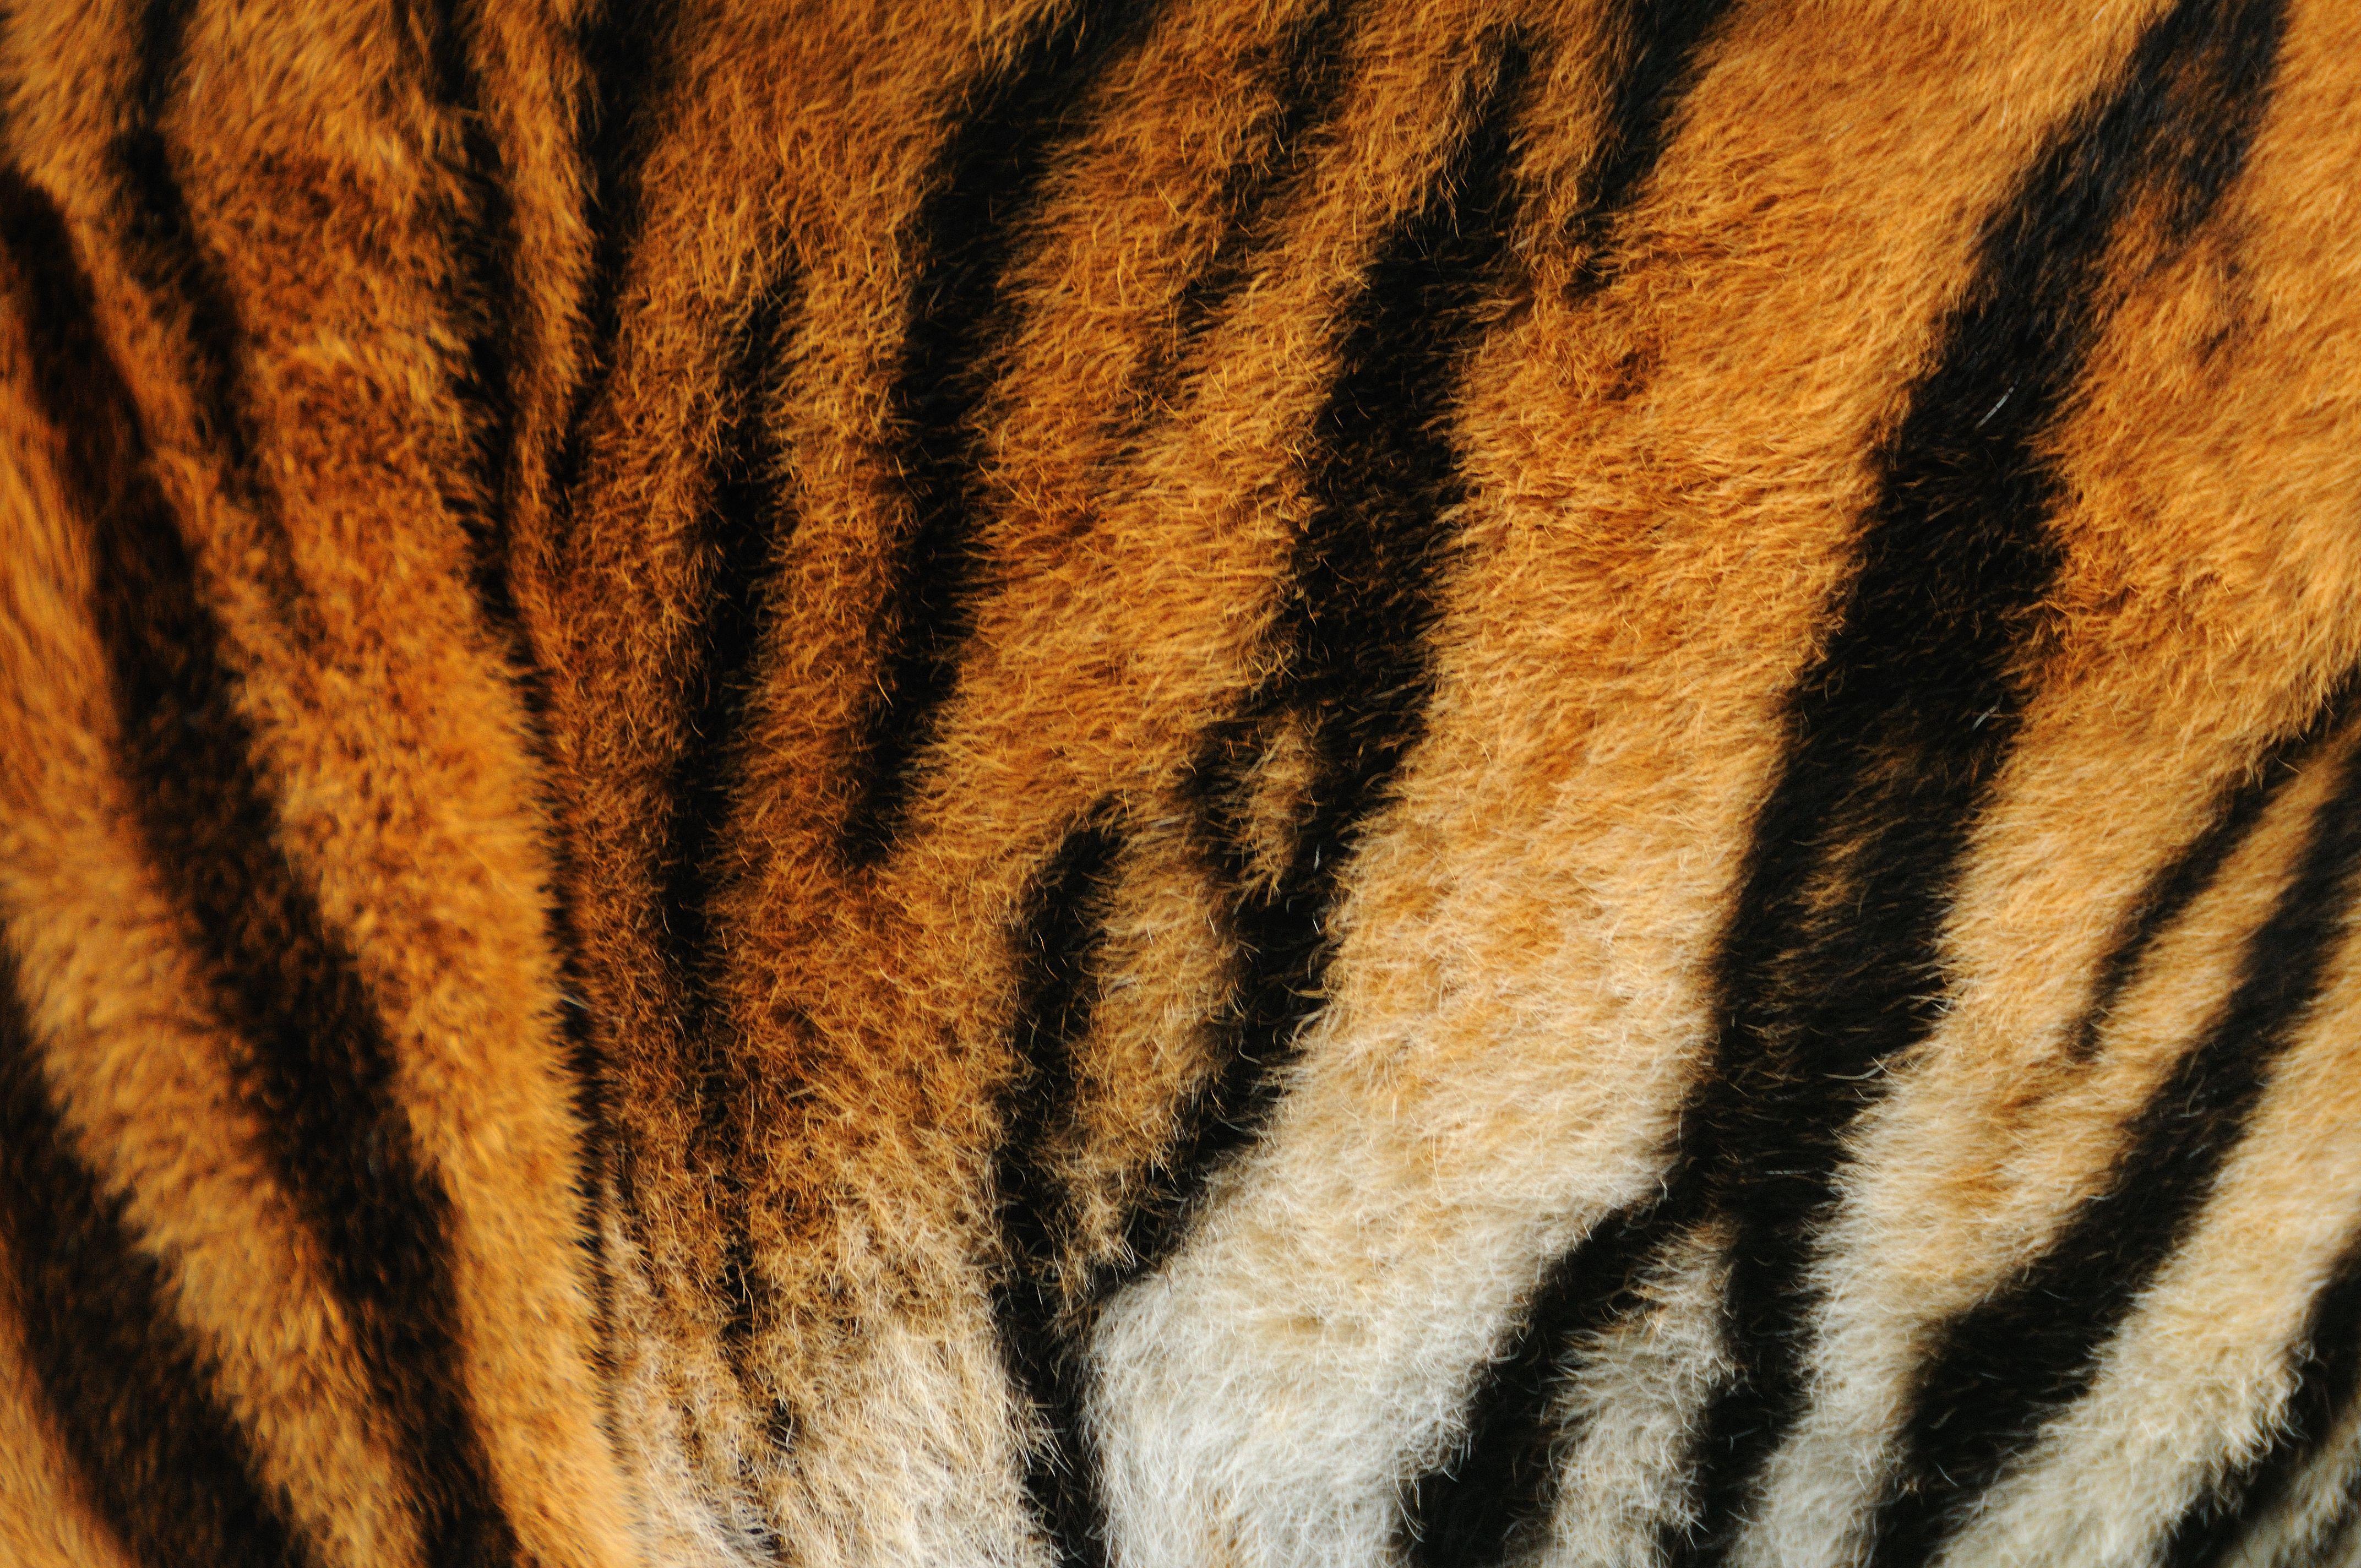 Tiger Stripes Background Images HD Pictures and Wallpaper For Free  Download  Pngtree